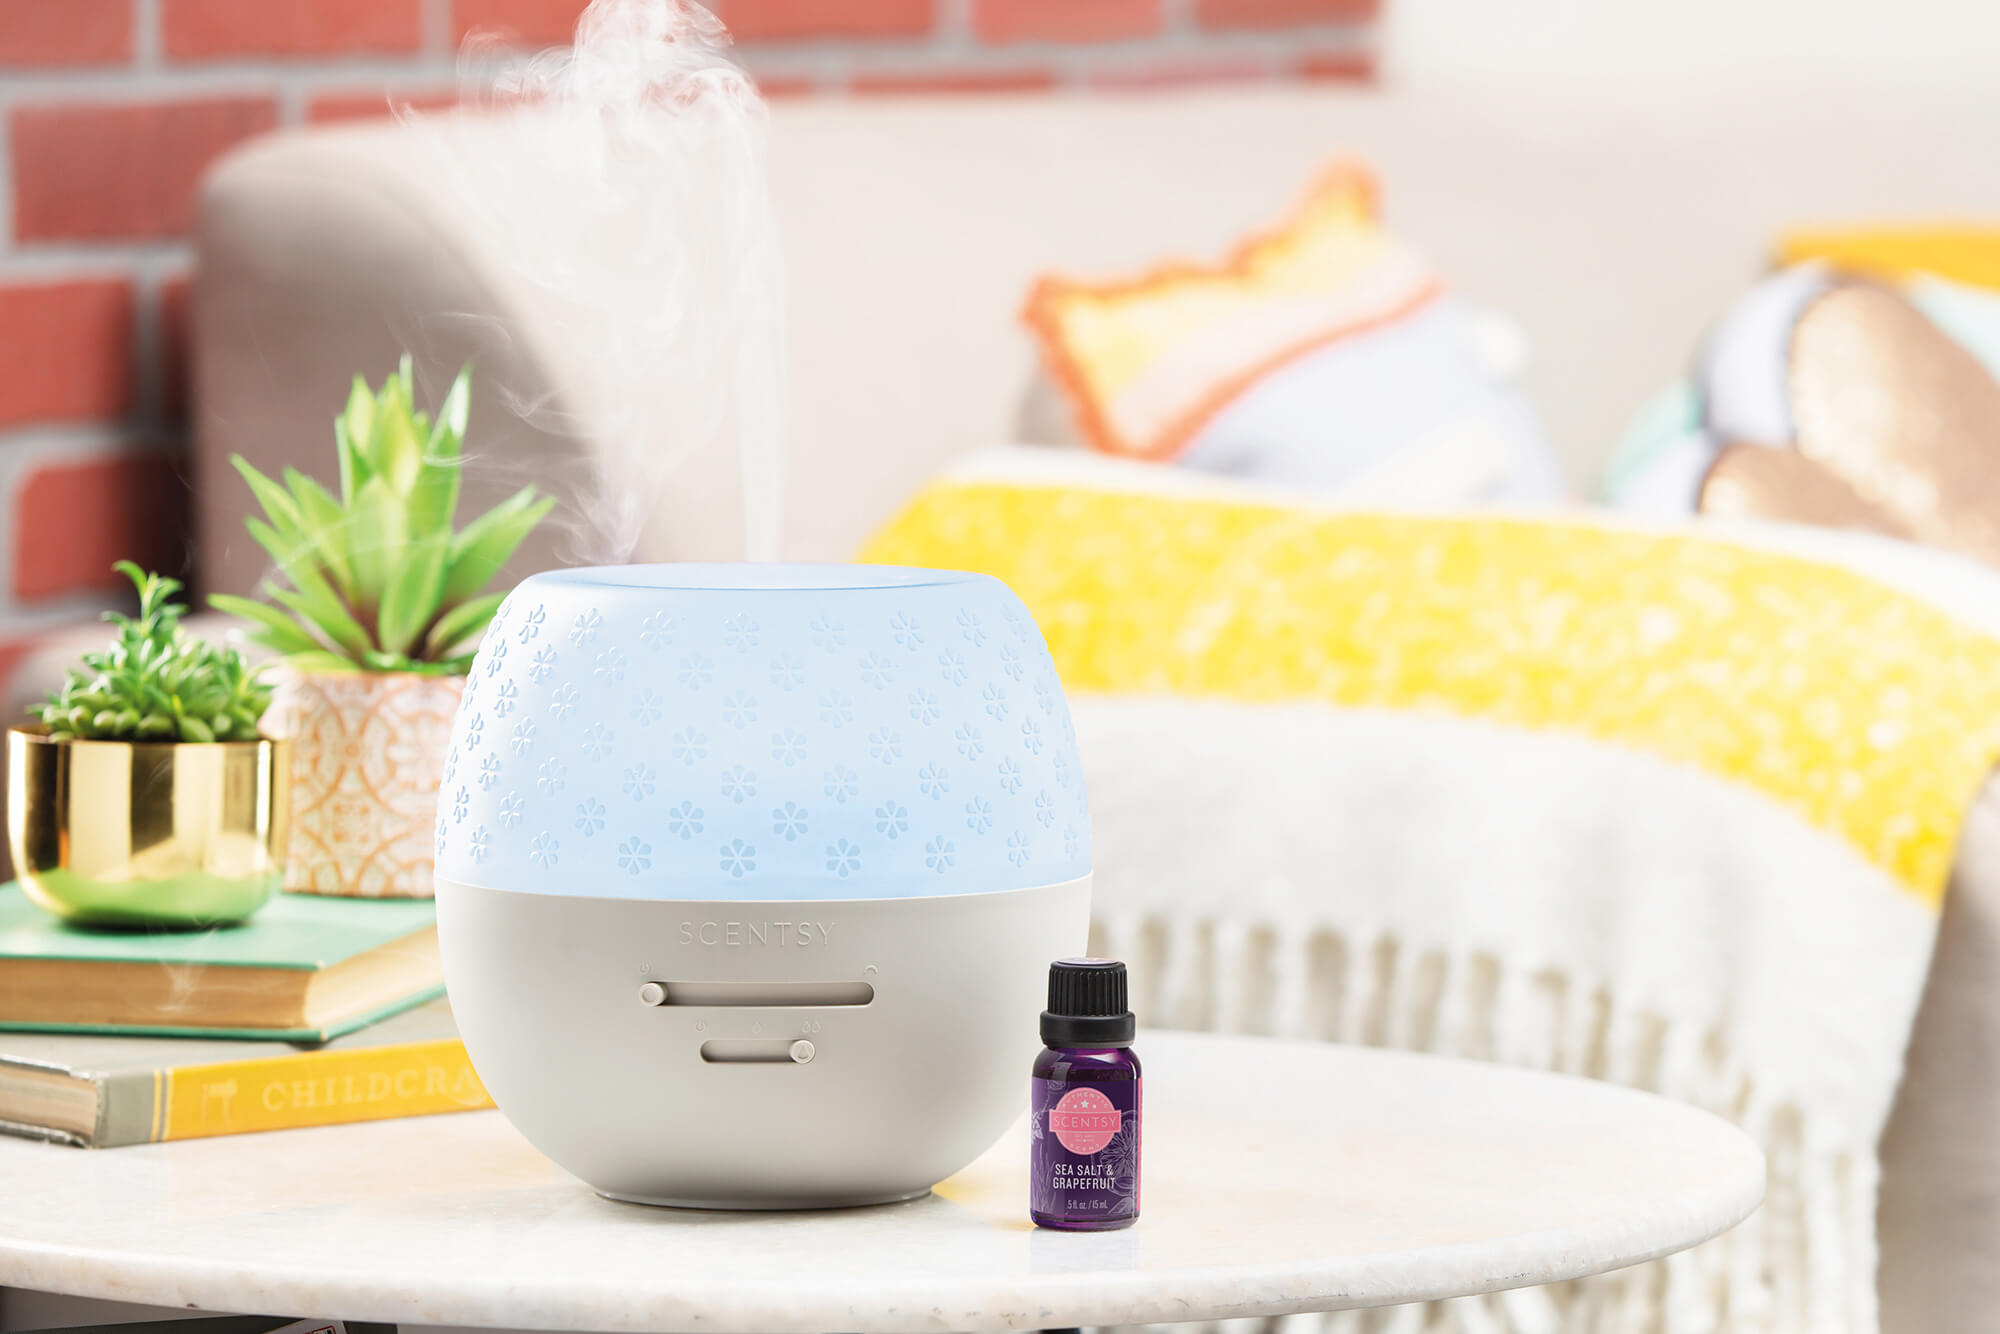 The fleur-gray Scentsy deluxe diffuser expelling the best scented essential oils in our sea salt & grapefruit fragrance